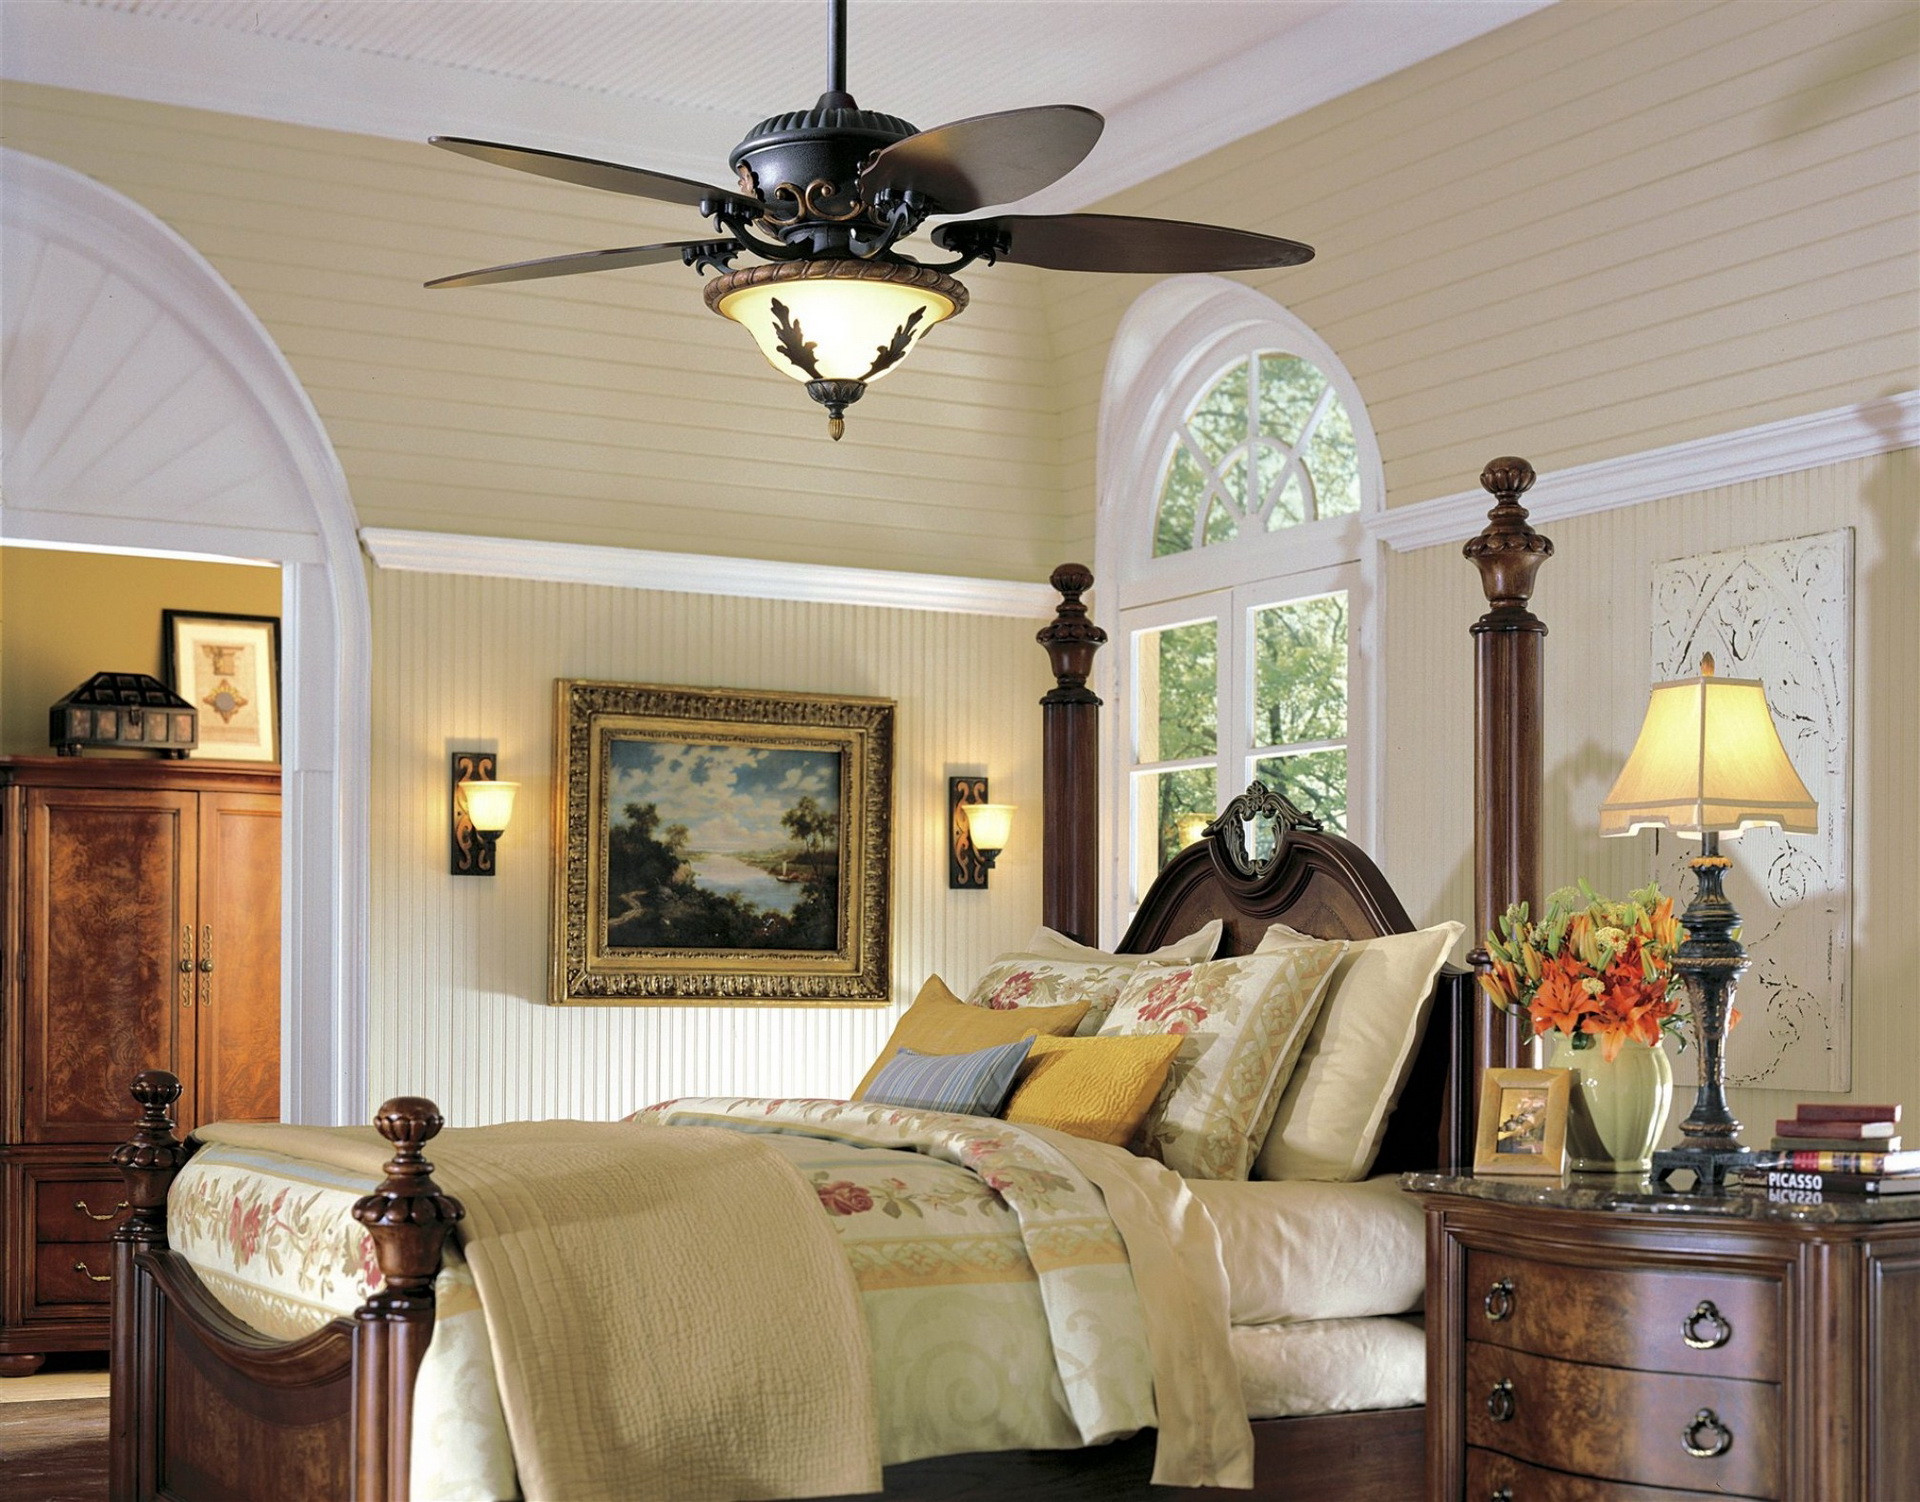 Bedroom Ceiling Fan With Light
 Master bedroom ceiling fans 25 methods to save your